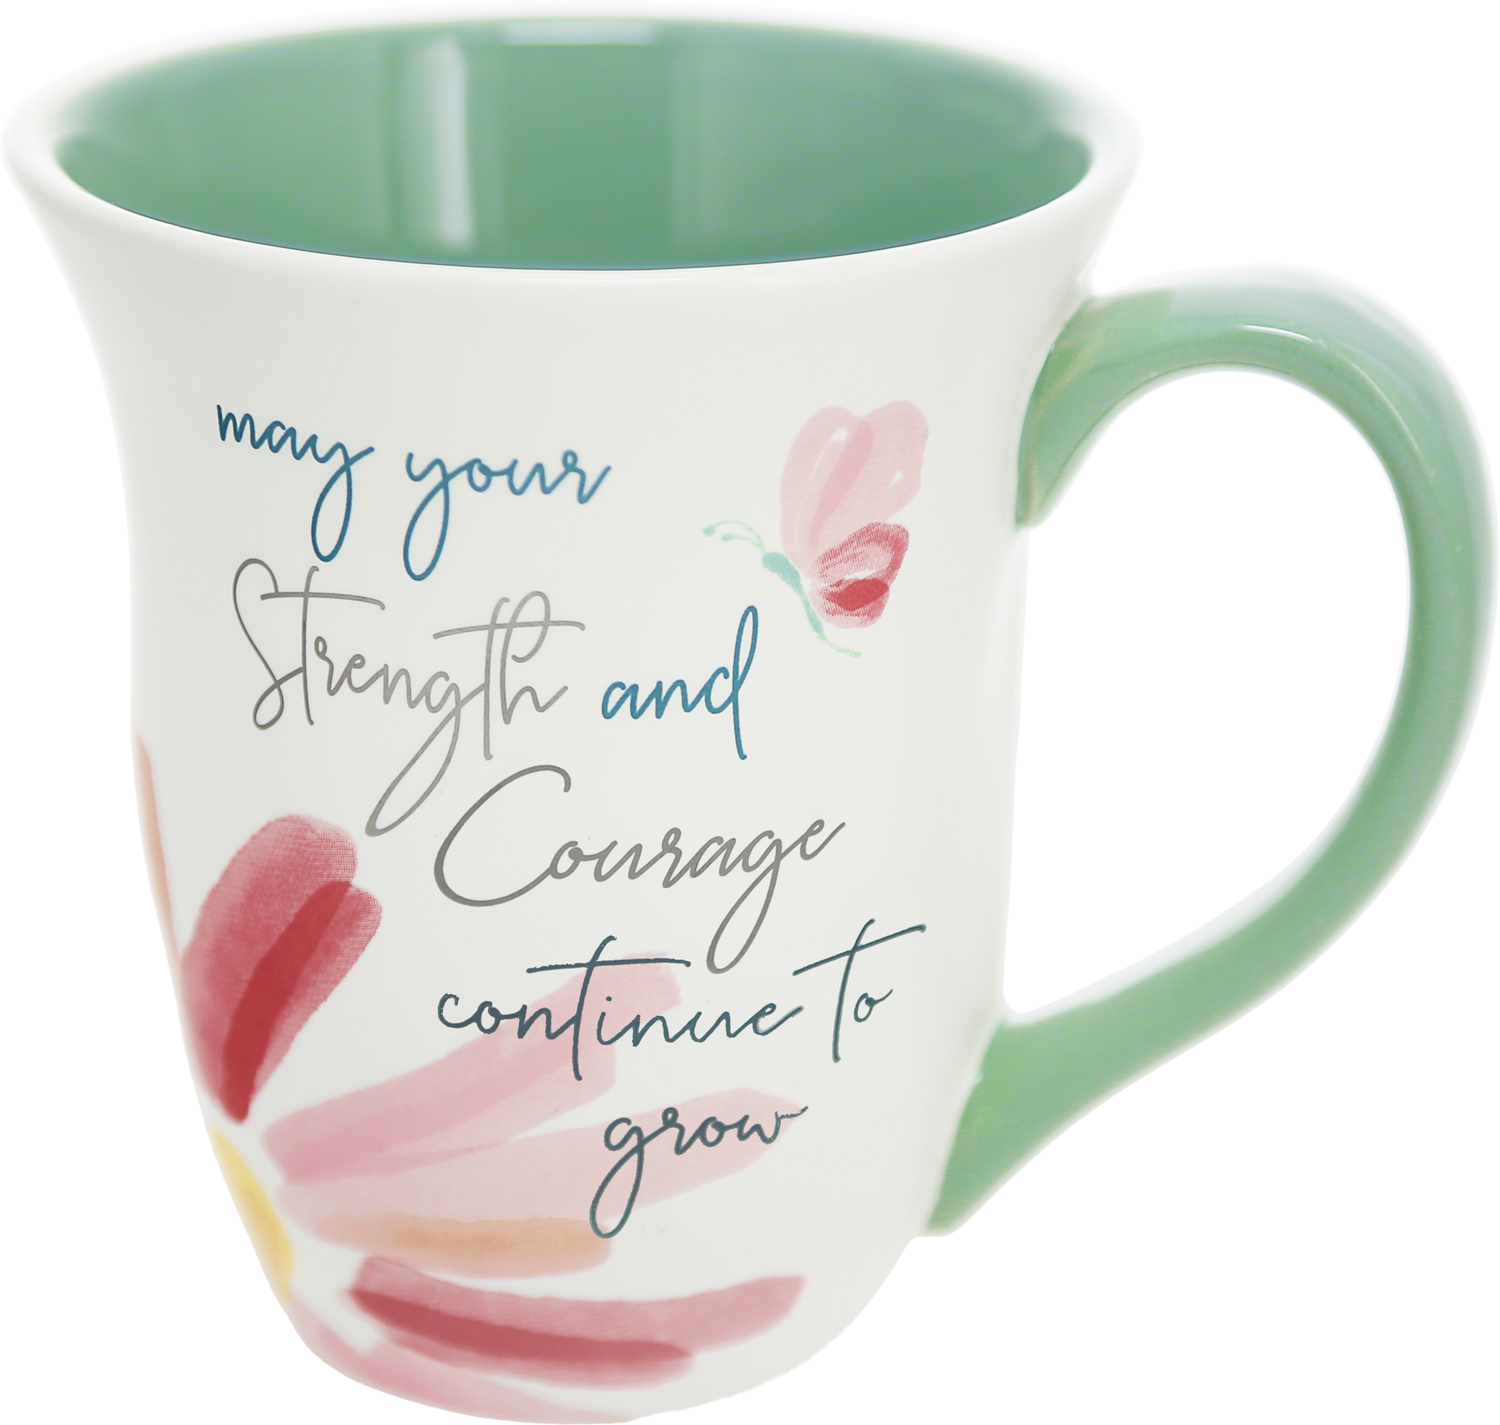 Strength & Courage by Rosy Heart - Strength & Courage - 16 oz Cup